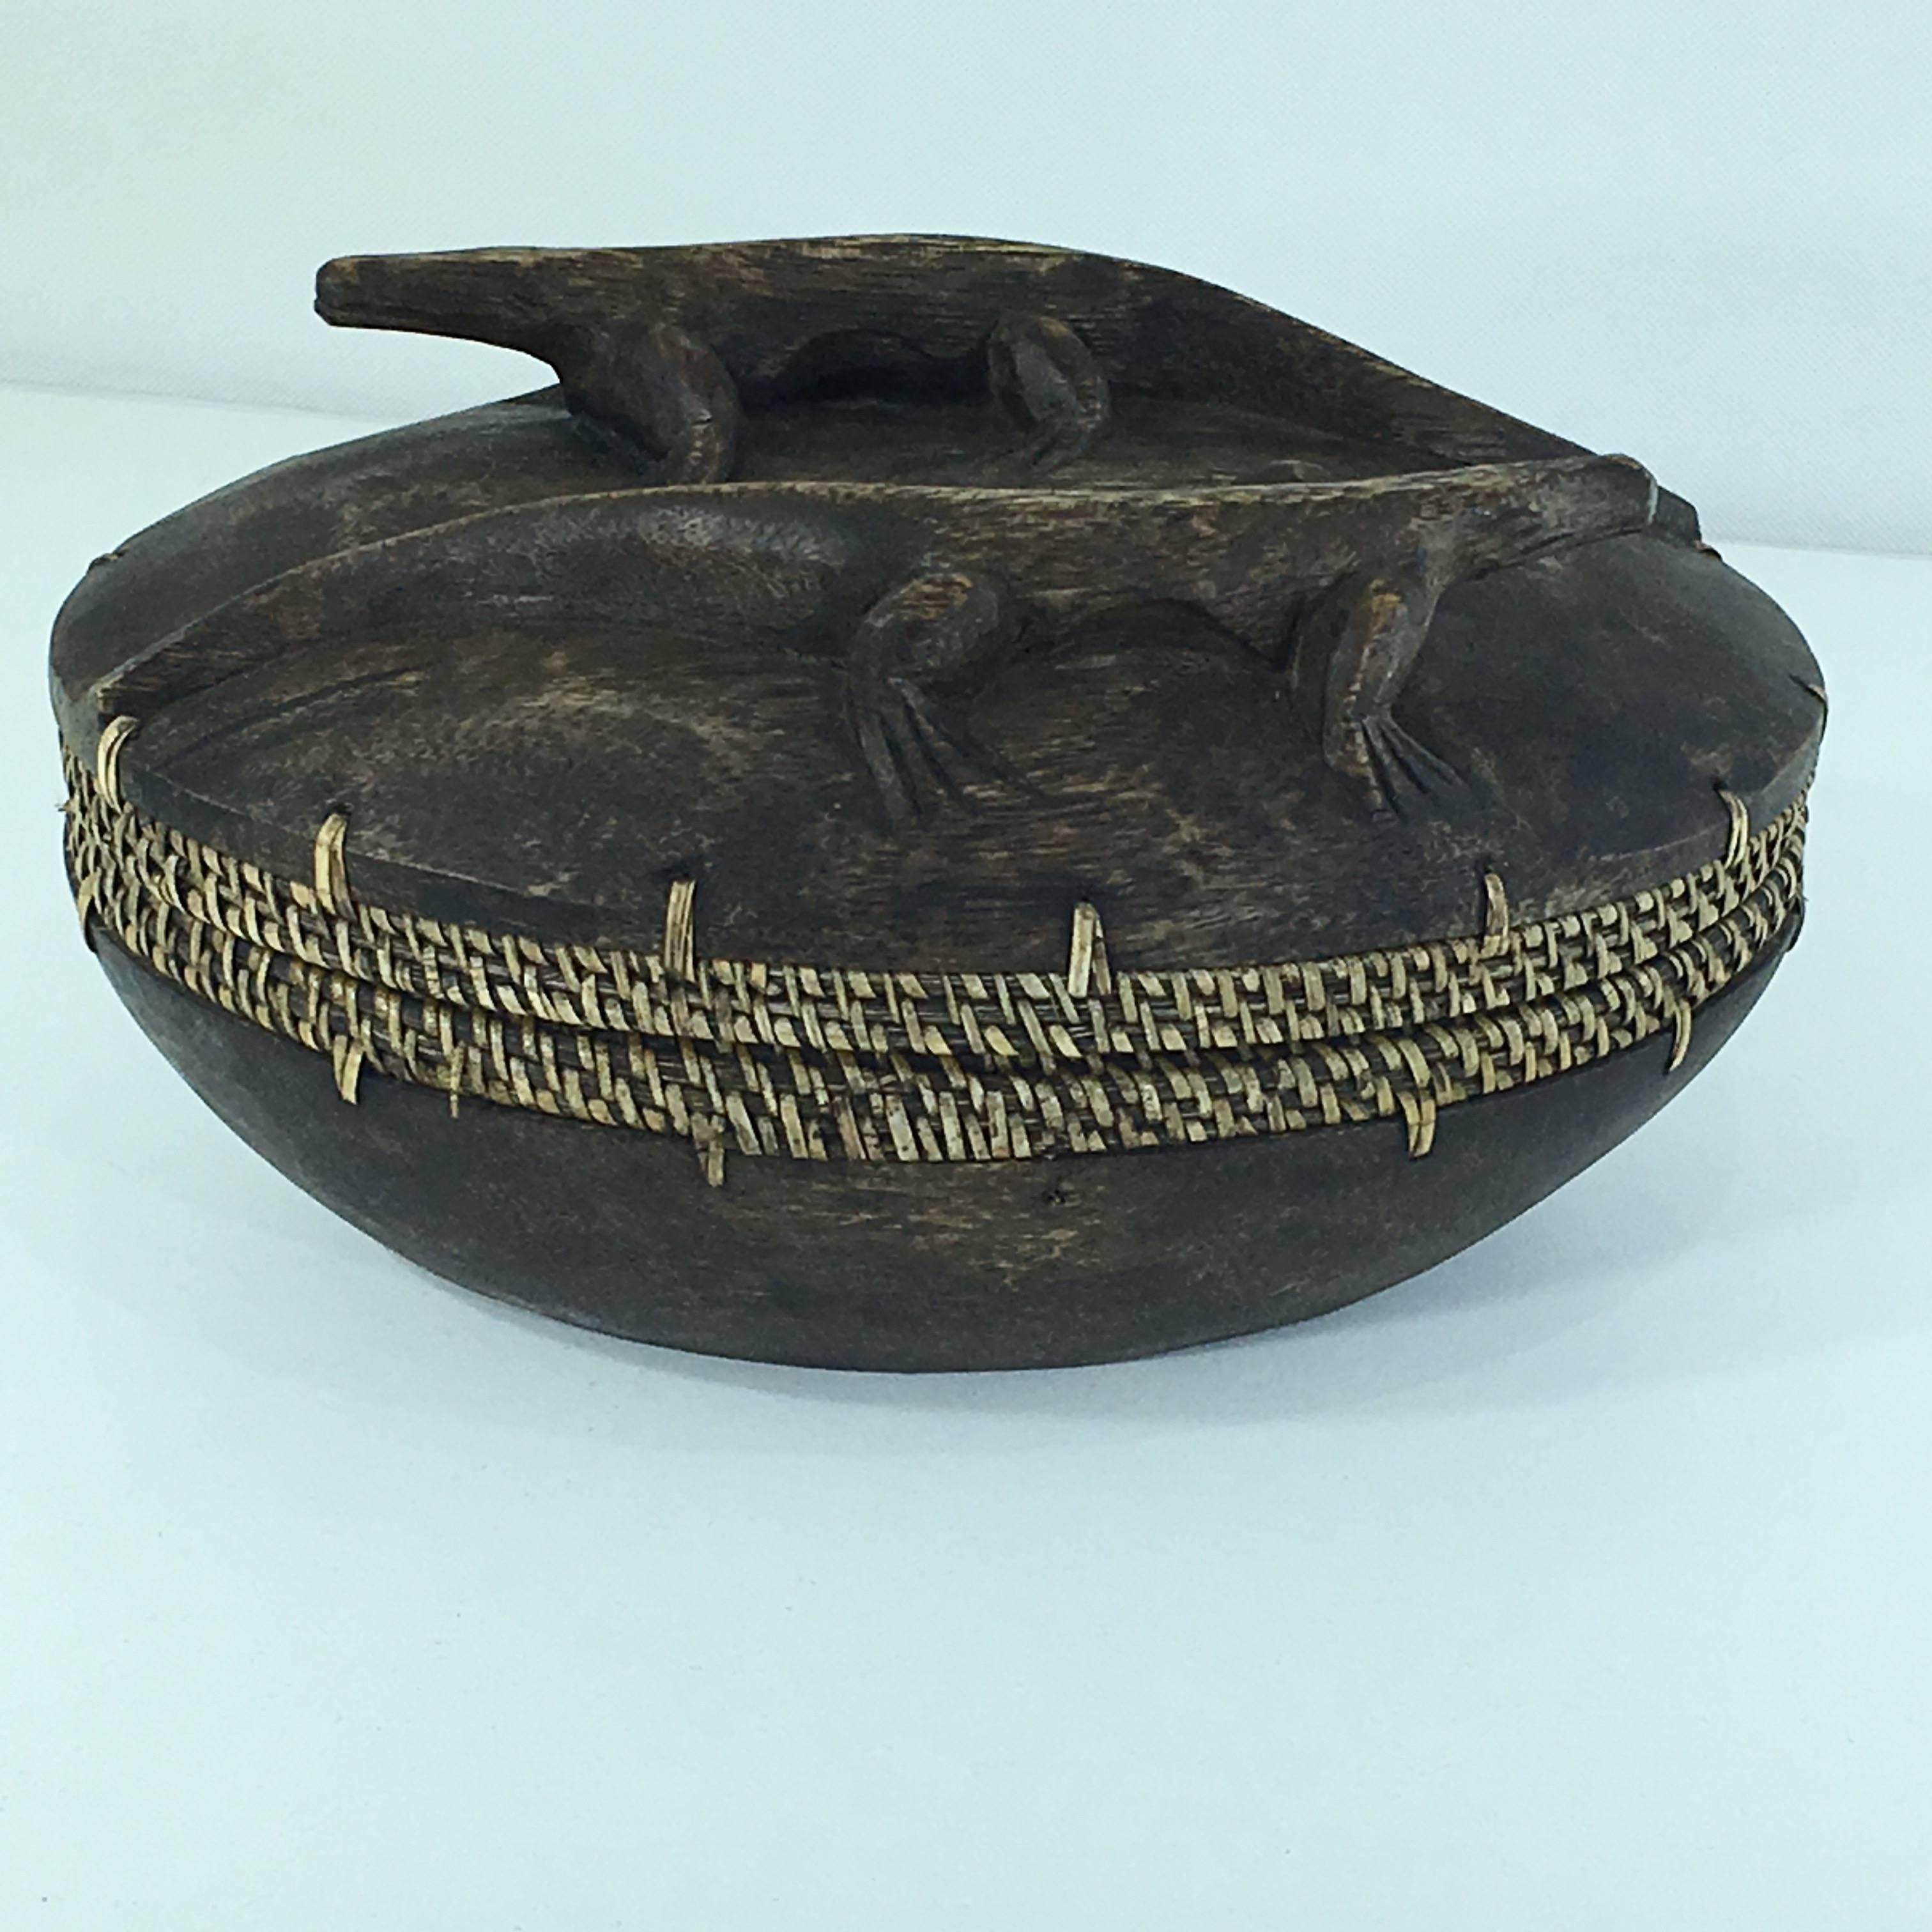 This box is from the Asian continent, made in the period, 1950-1960. We can see cane on the border, that gives an handmade authenticity and image to the item. It is in good condition, and the color is brown and kind of yellow. The sculpted animals